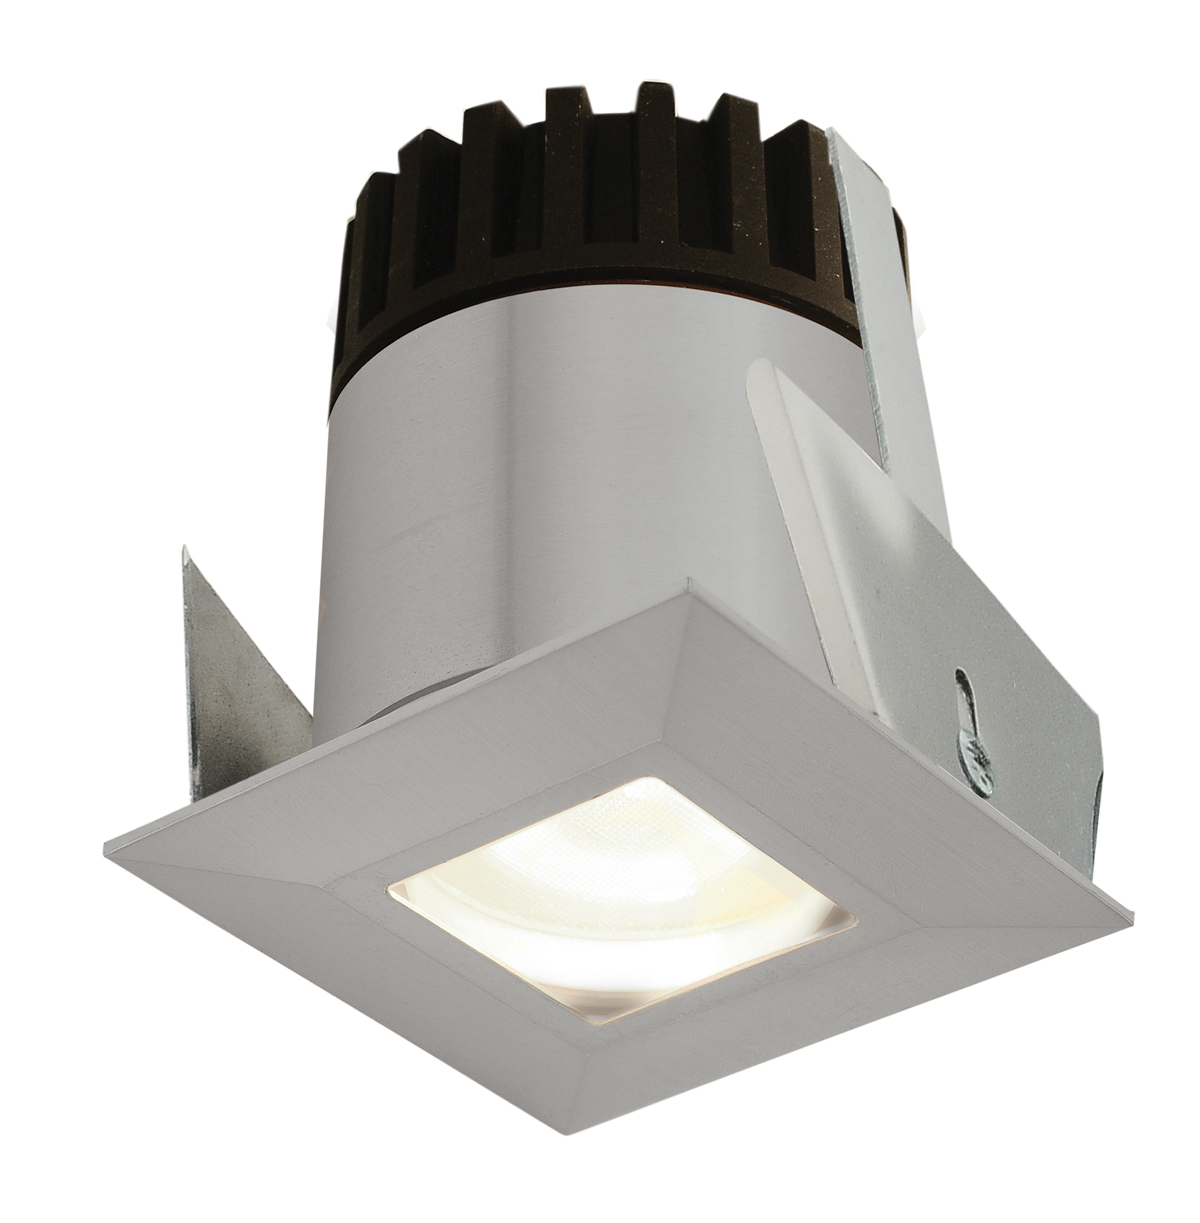 Sun3C Indoor/Outdoor Ceiling LED Downlight by PureEdge Lighting | SUN3C-HDL3-SQ-WW-SA |